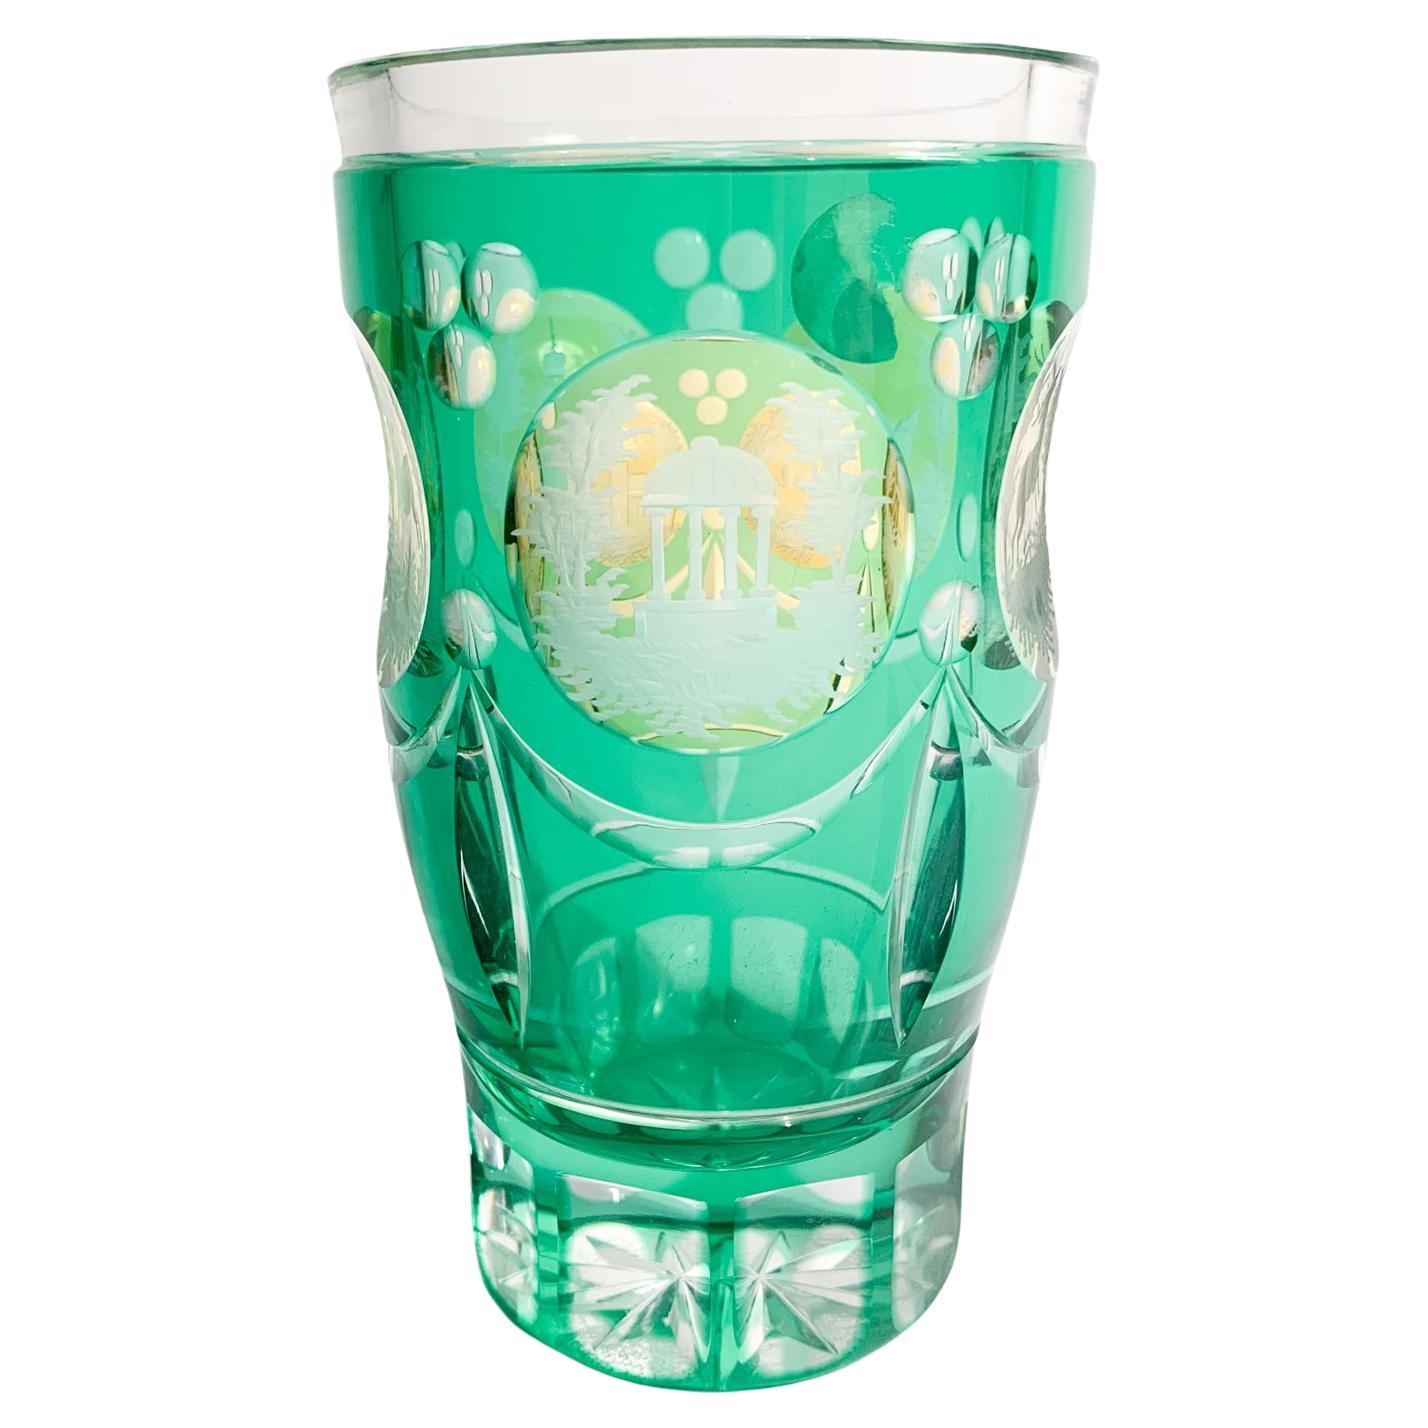 Biedermeier Acid-decorated Green and Yellow Crystal Glass from the 19th Century